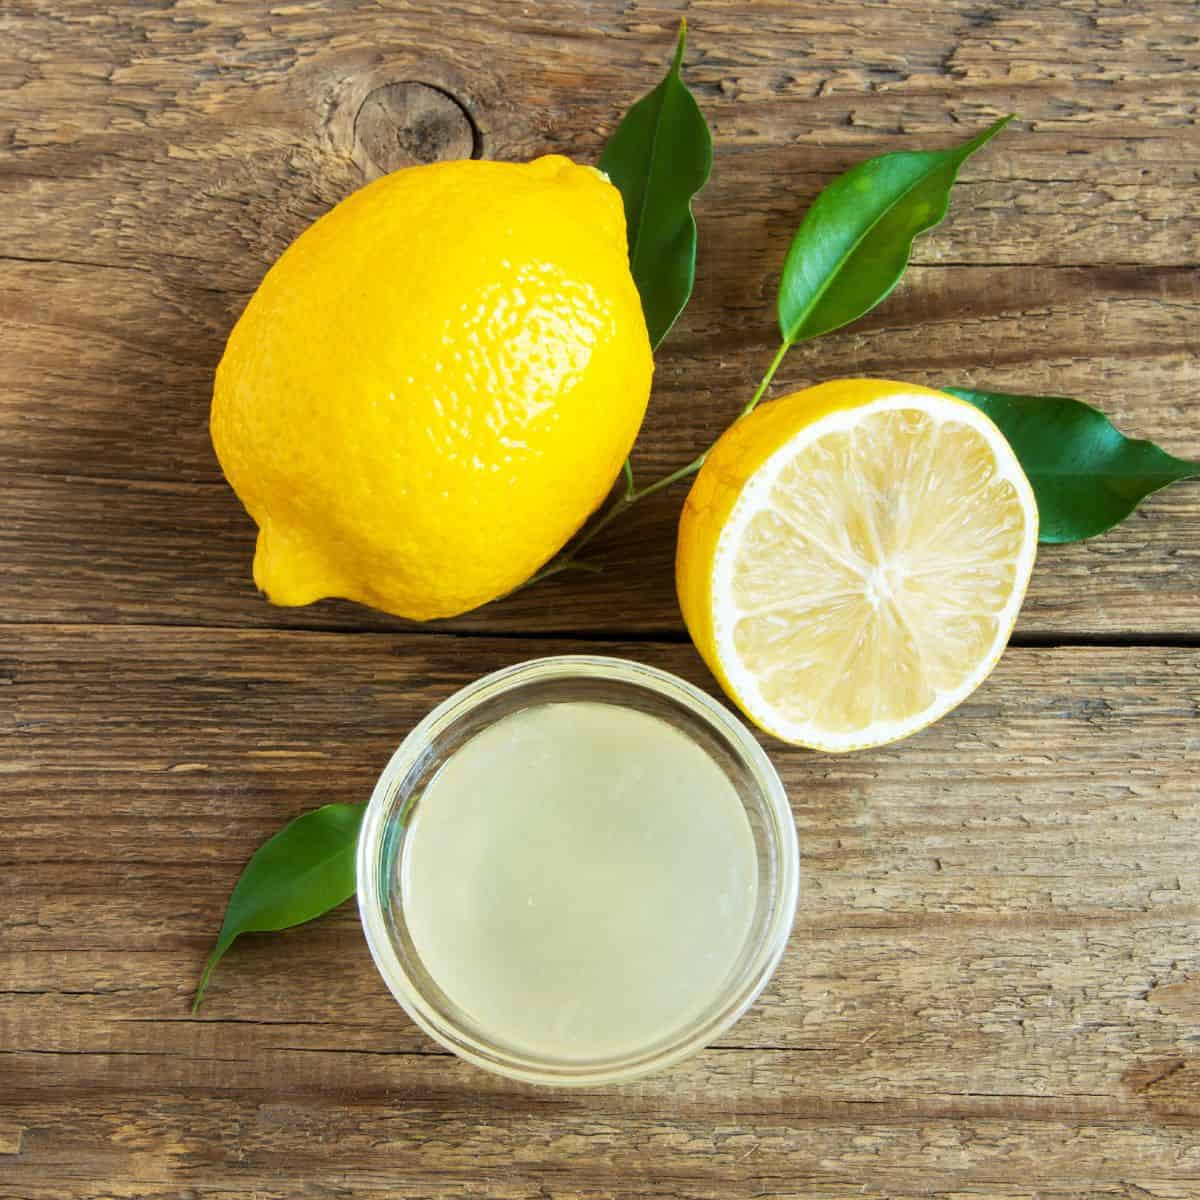 a wood background with one whole lemon with green leaves and one cut lemon next to a birds eye view of a glass of lemon juice